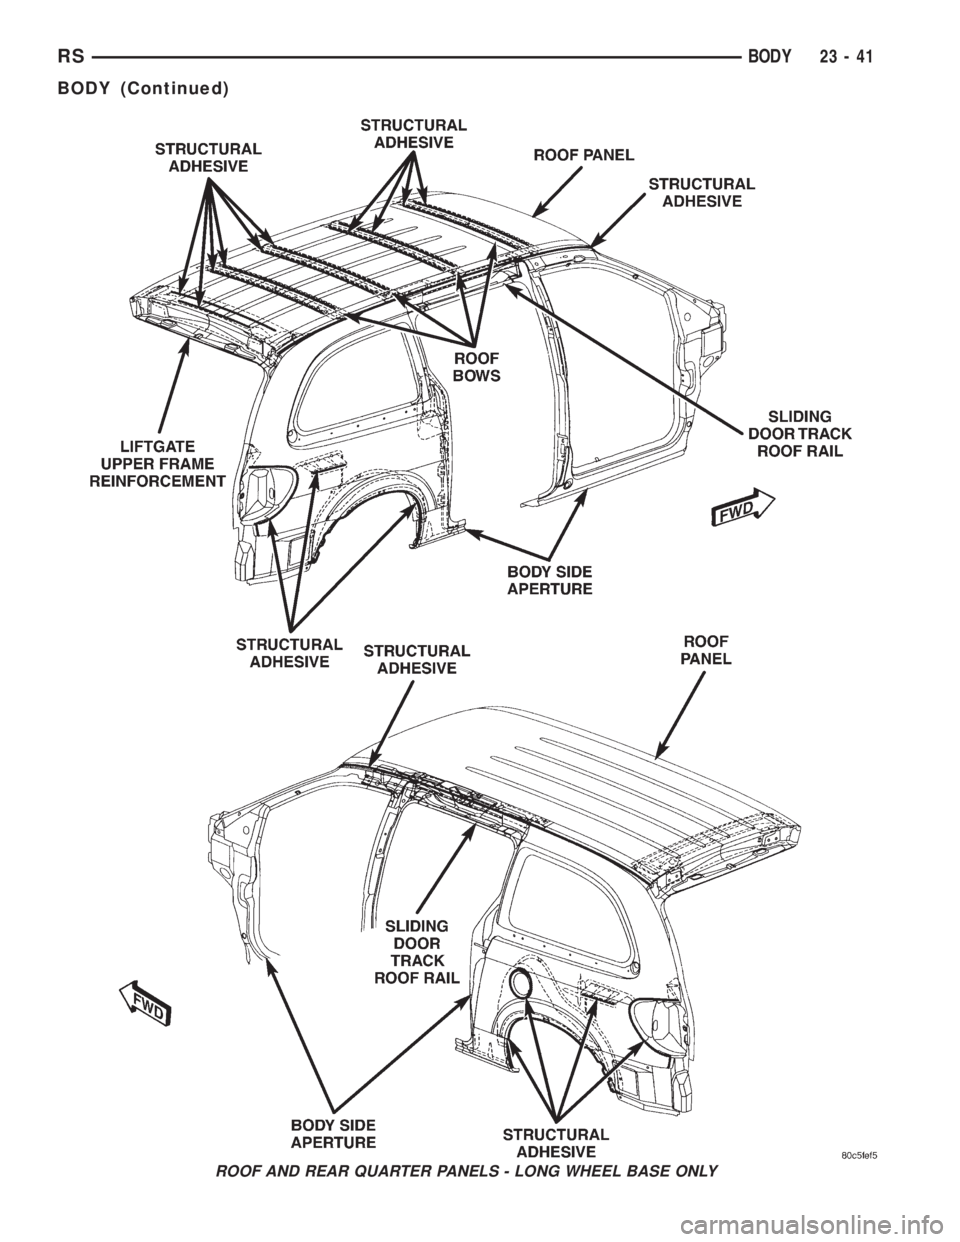 CHRYSLER VOYAGER 2001  Service Manual ROOF AND REAR QUARTER PANELS - LONG WHEEL BASE ONLY
RSBODY23-41
BODY (Continued) 